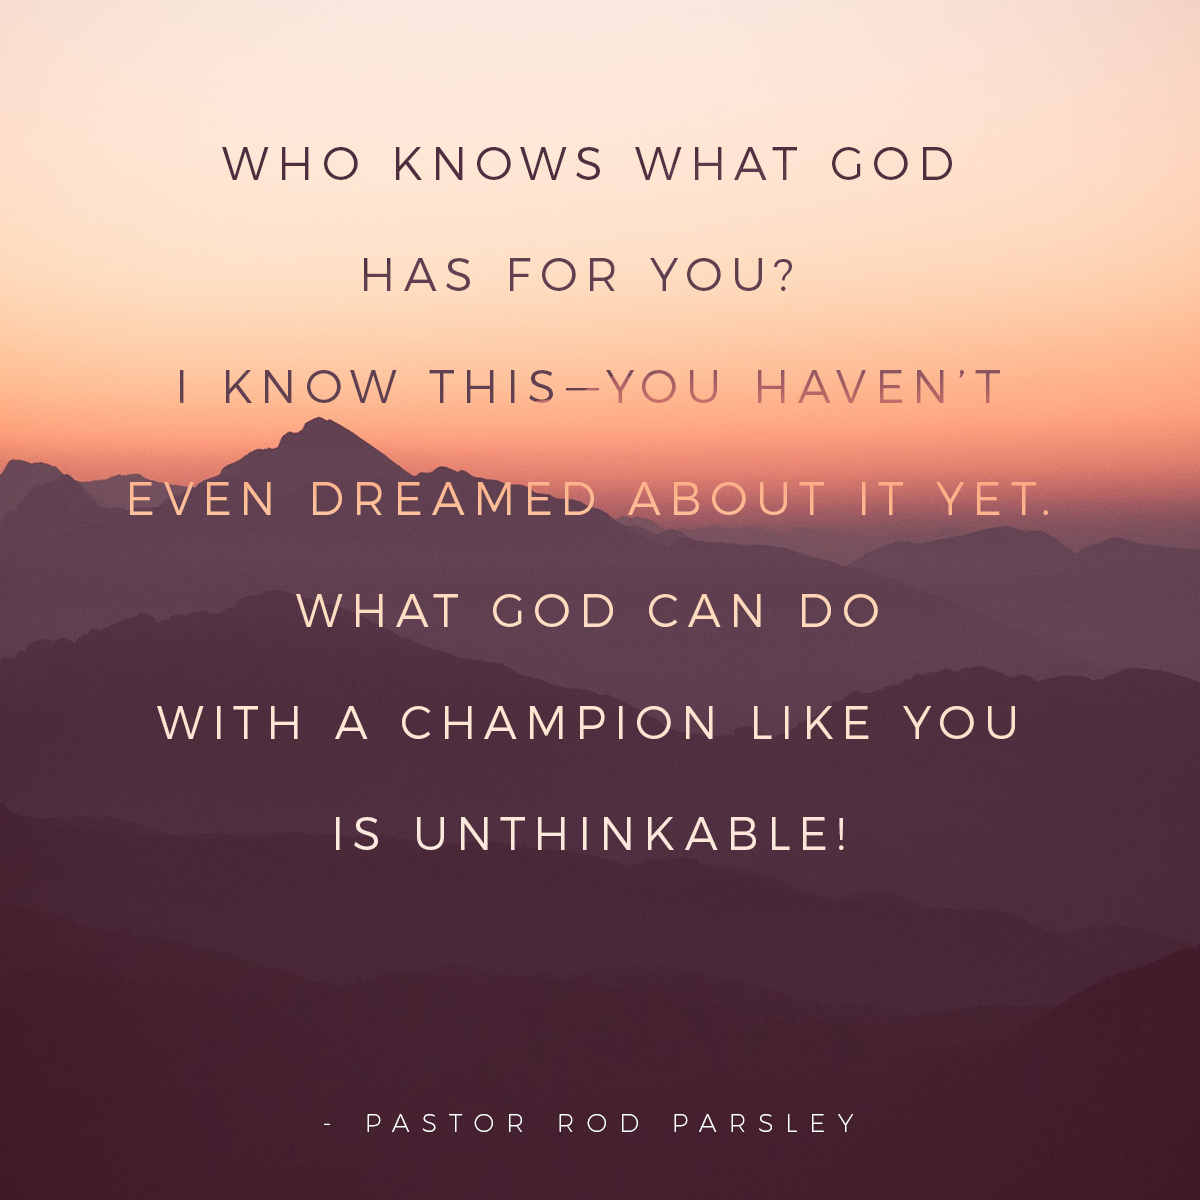 “Who knows what God has for you?  I know this—you haven’t even dreamed about it yet. What God can do with a champion like you is unthinkable!” – Pastor Rod Parsley